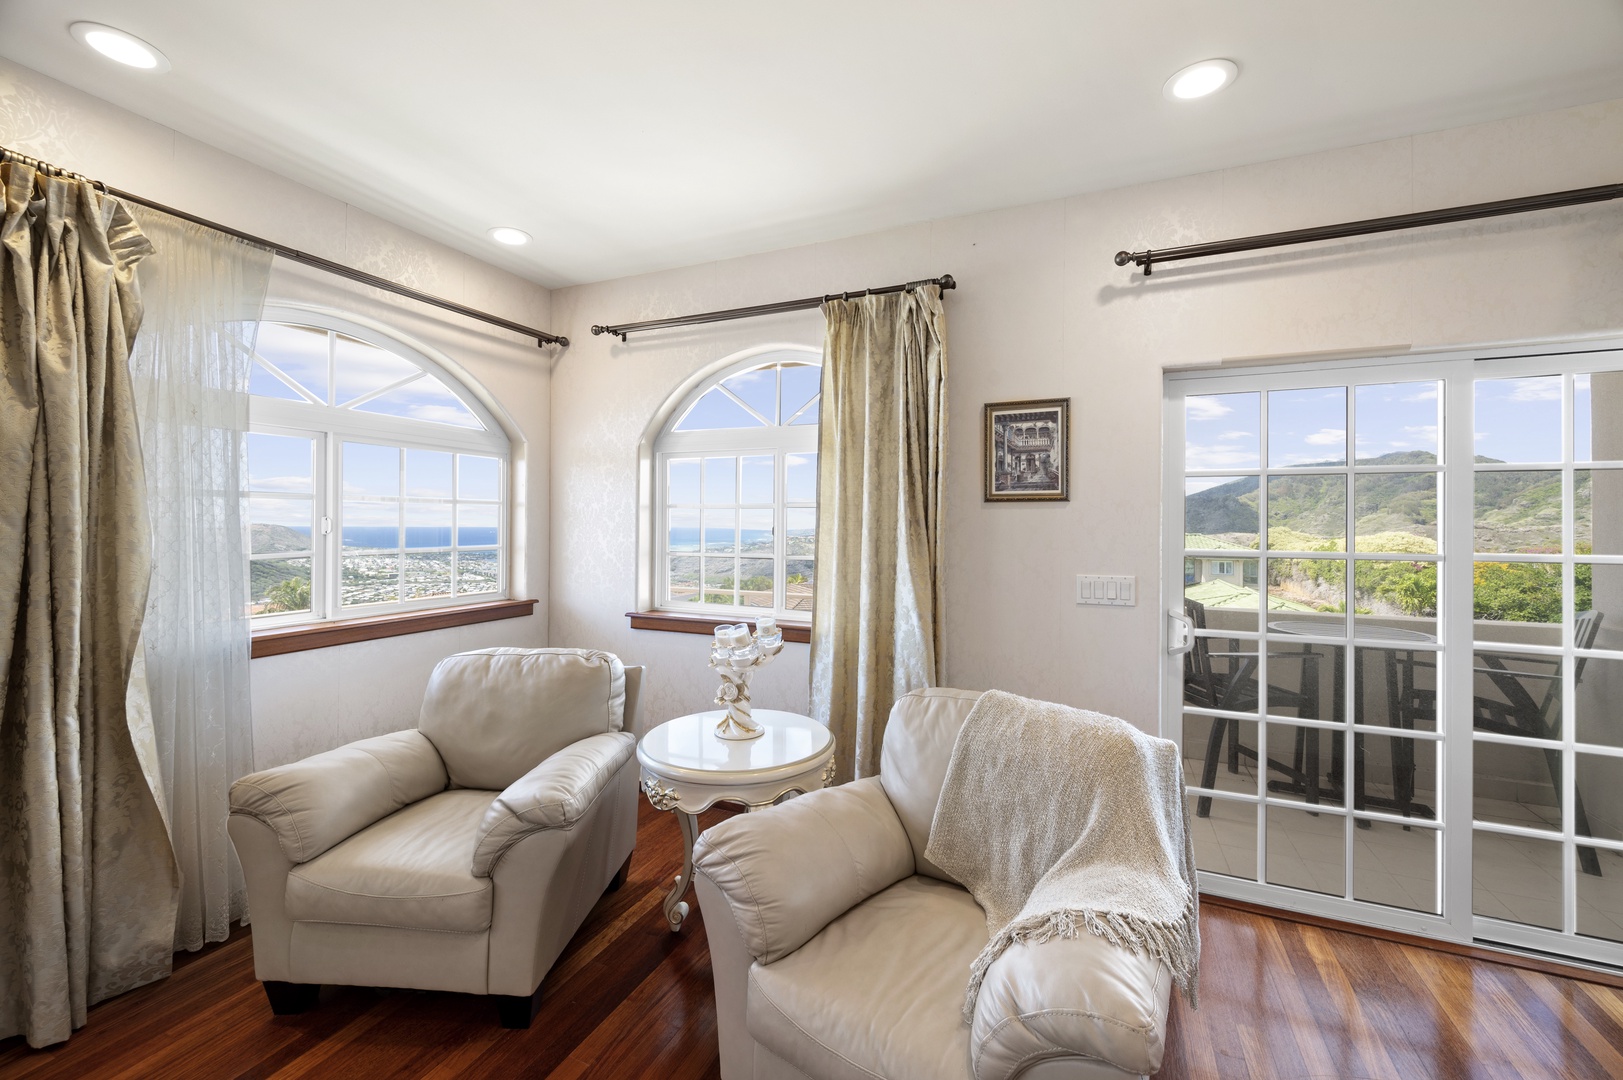 Honolulu Vacation Rentals, Lotus on a Hill* - Enjoy two comfortable side chairs and a writing desk in the Primary Bedroom with a gorgeous view